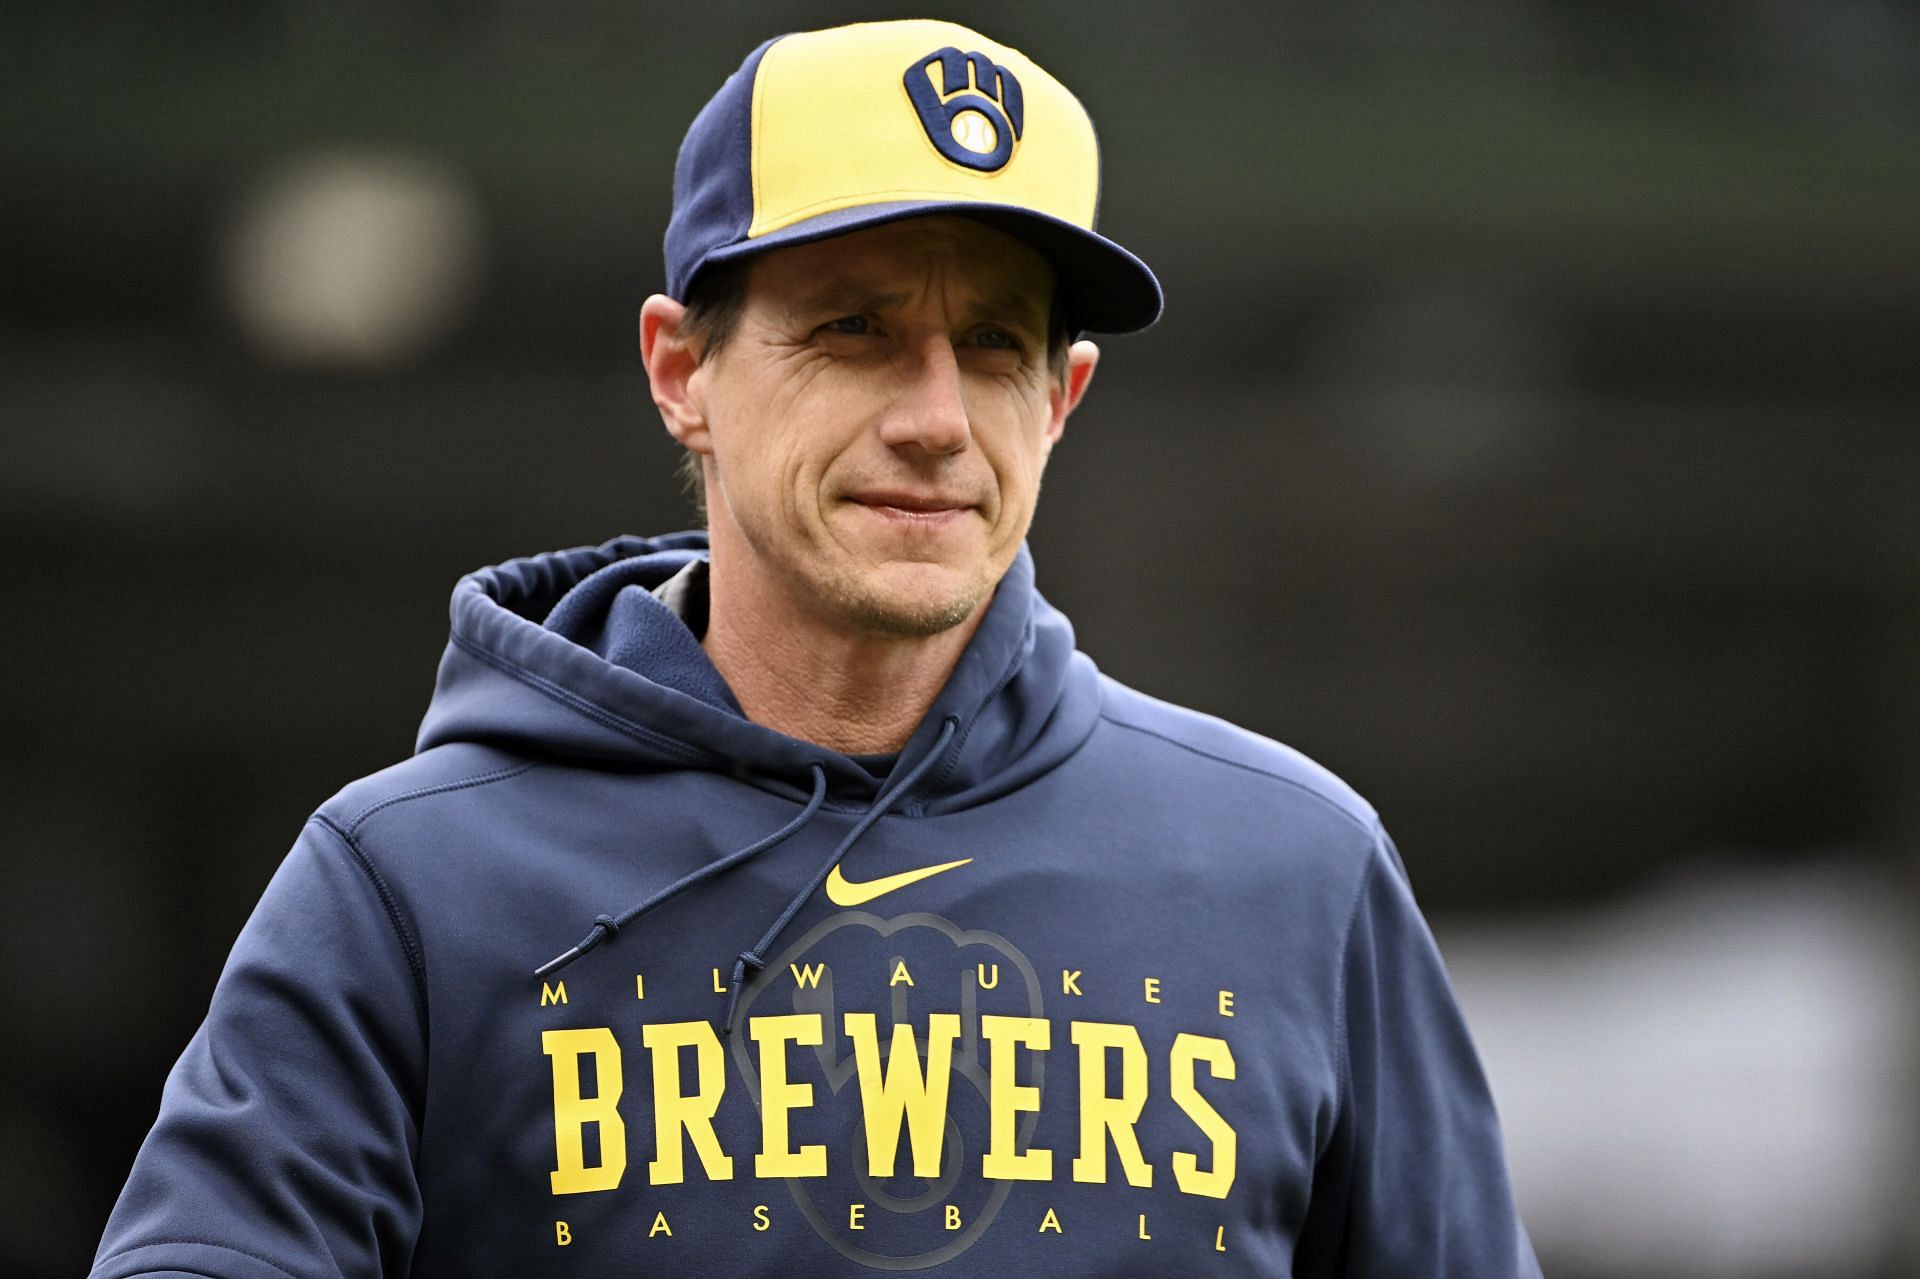 Craig Counsell joins Cubs